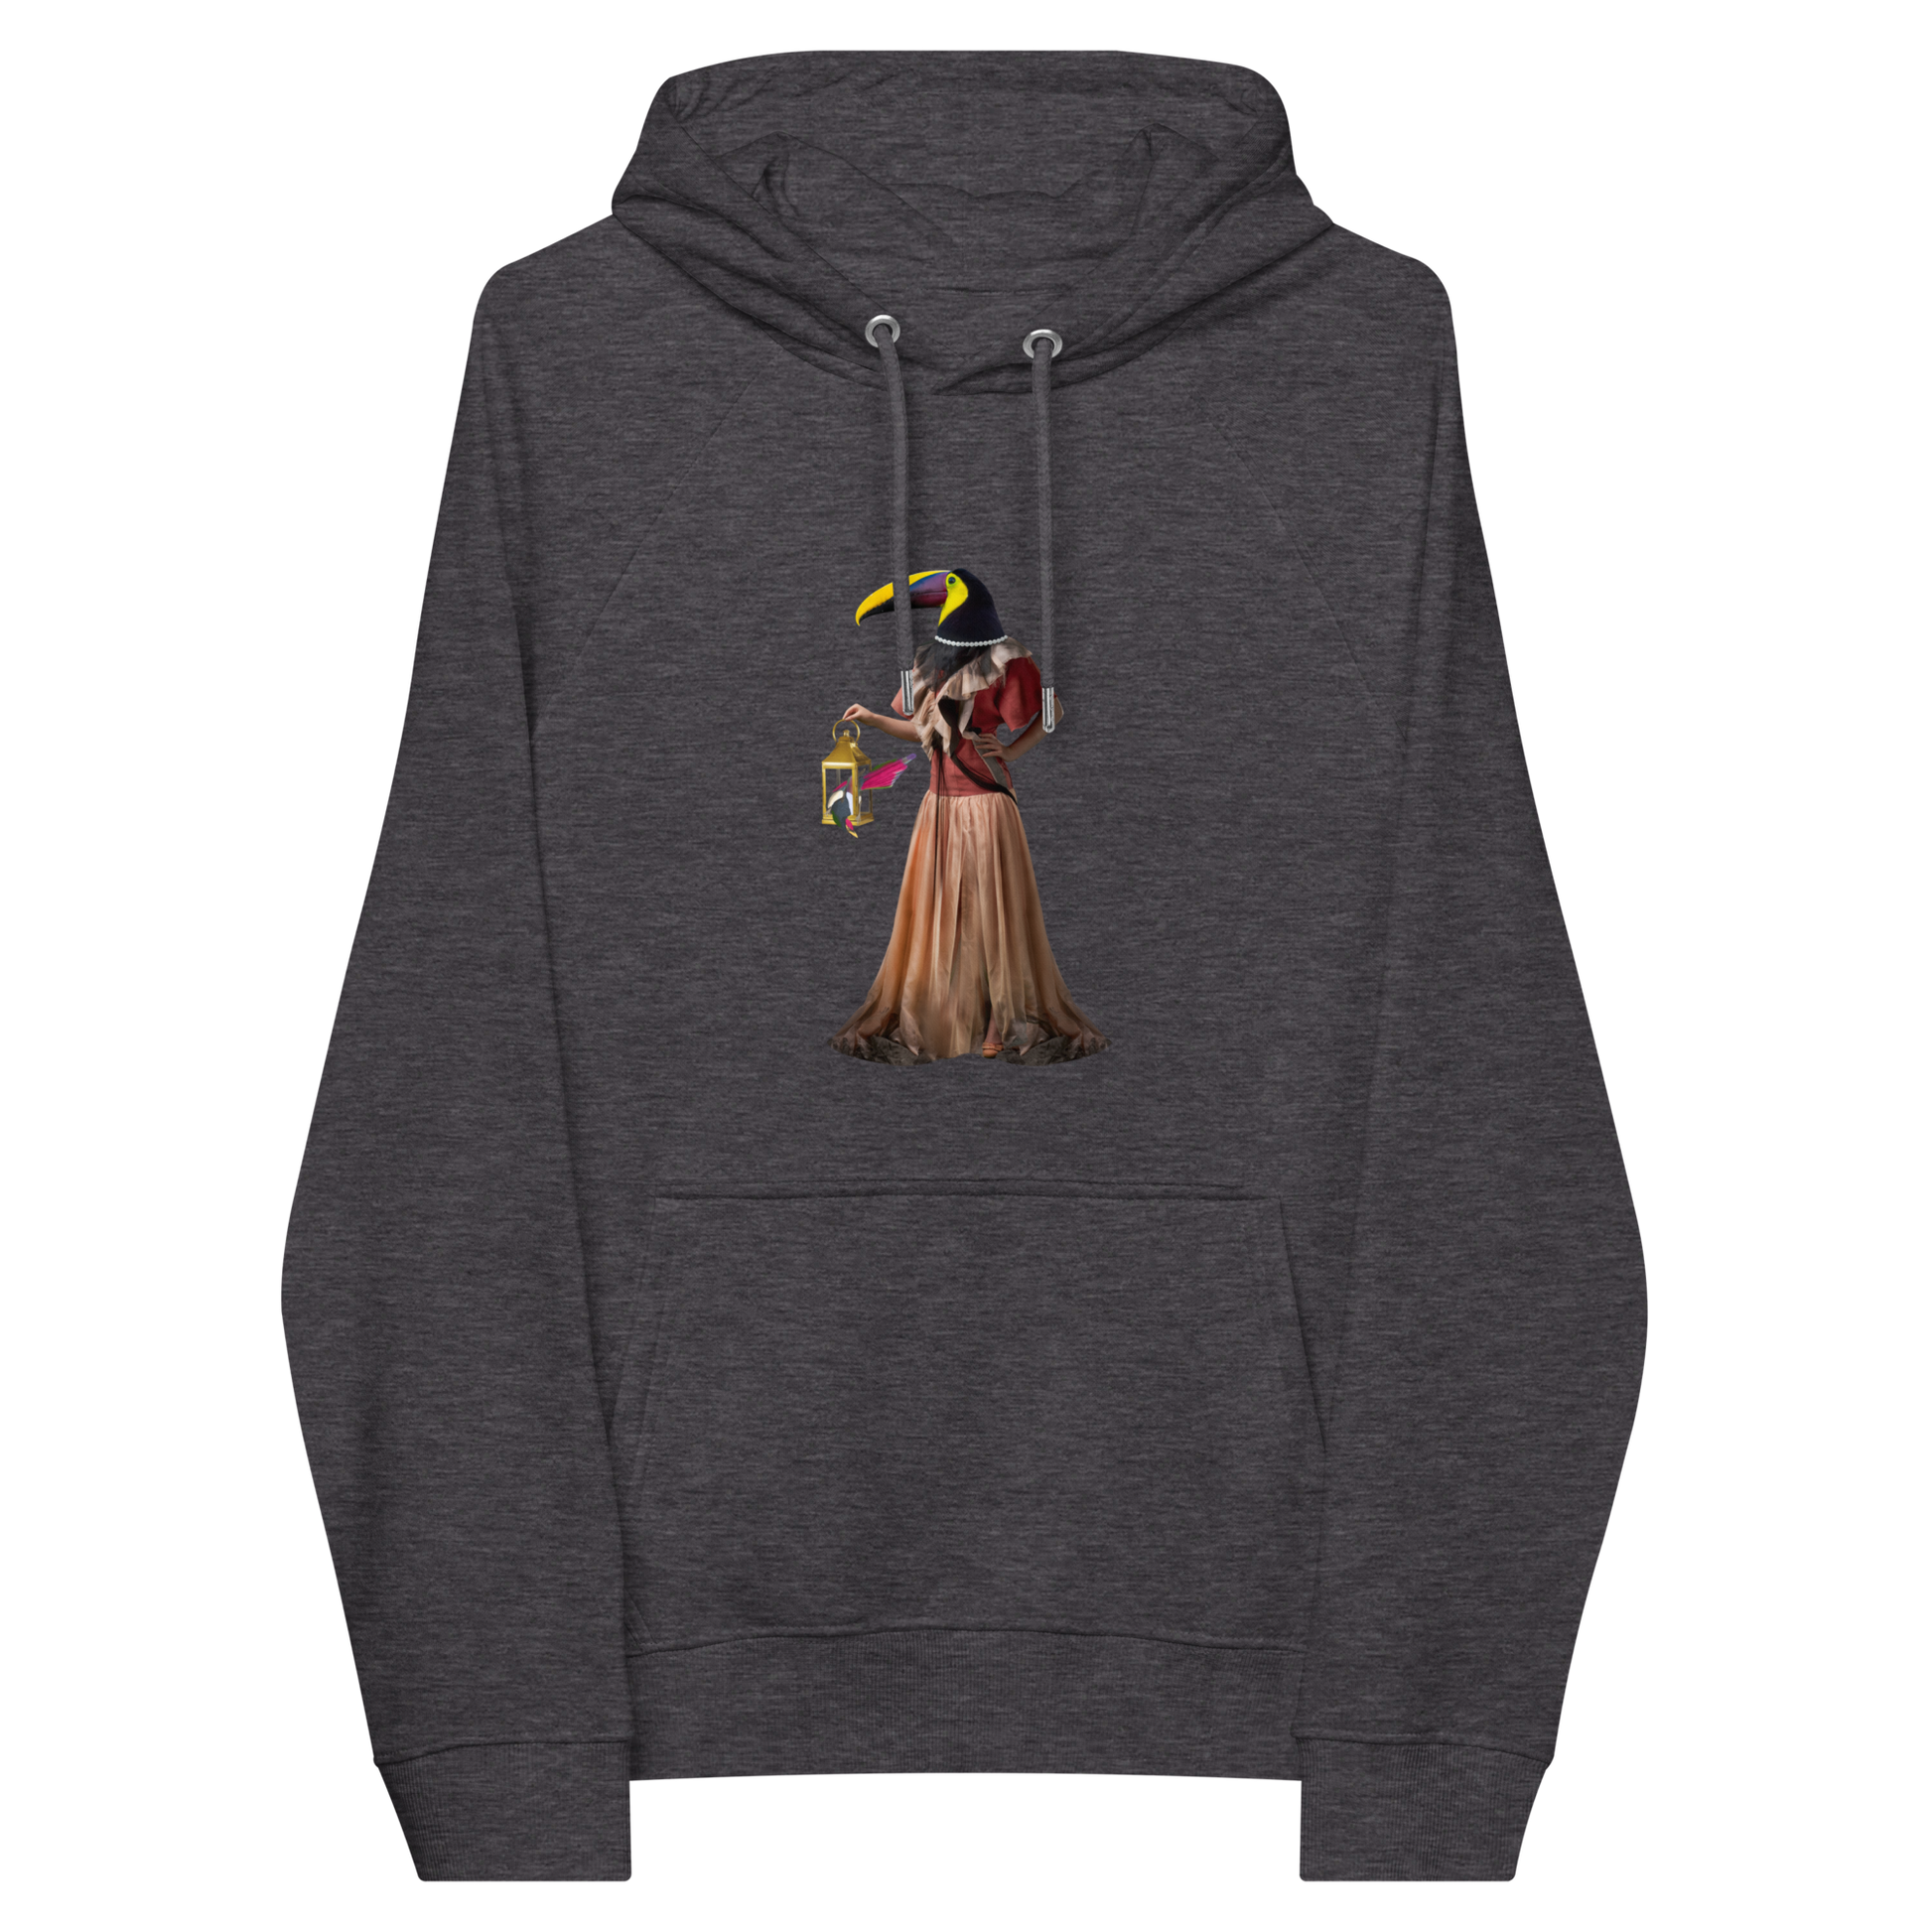 Charcoal Melange Anthropomorphic Toucan Raglan Hoodie featuring a amusing Anthropomorphic Toucan graphic on the chest - Funny Graphic Toucan Hoodies - Boozy Fox